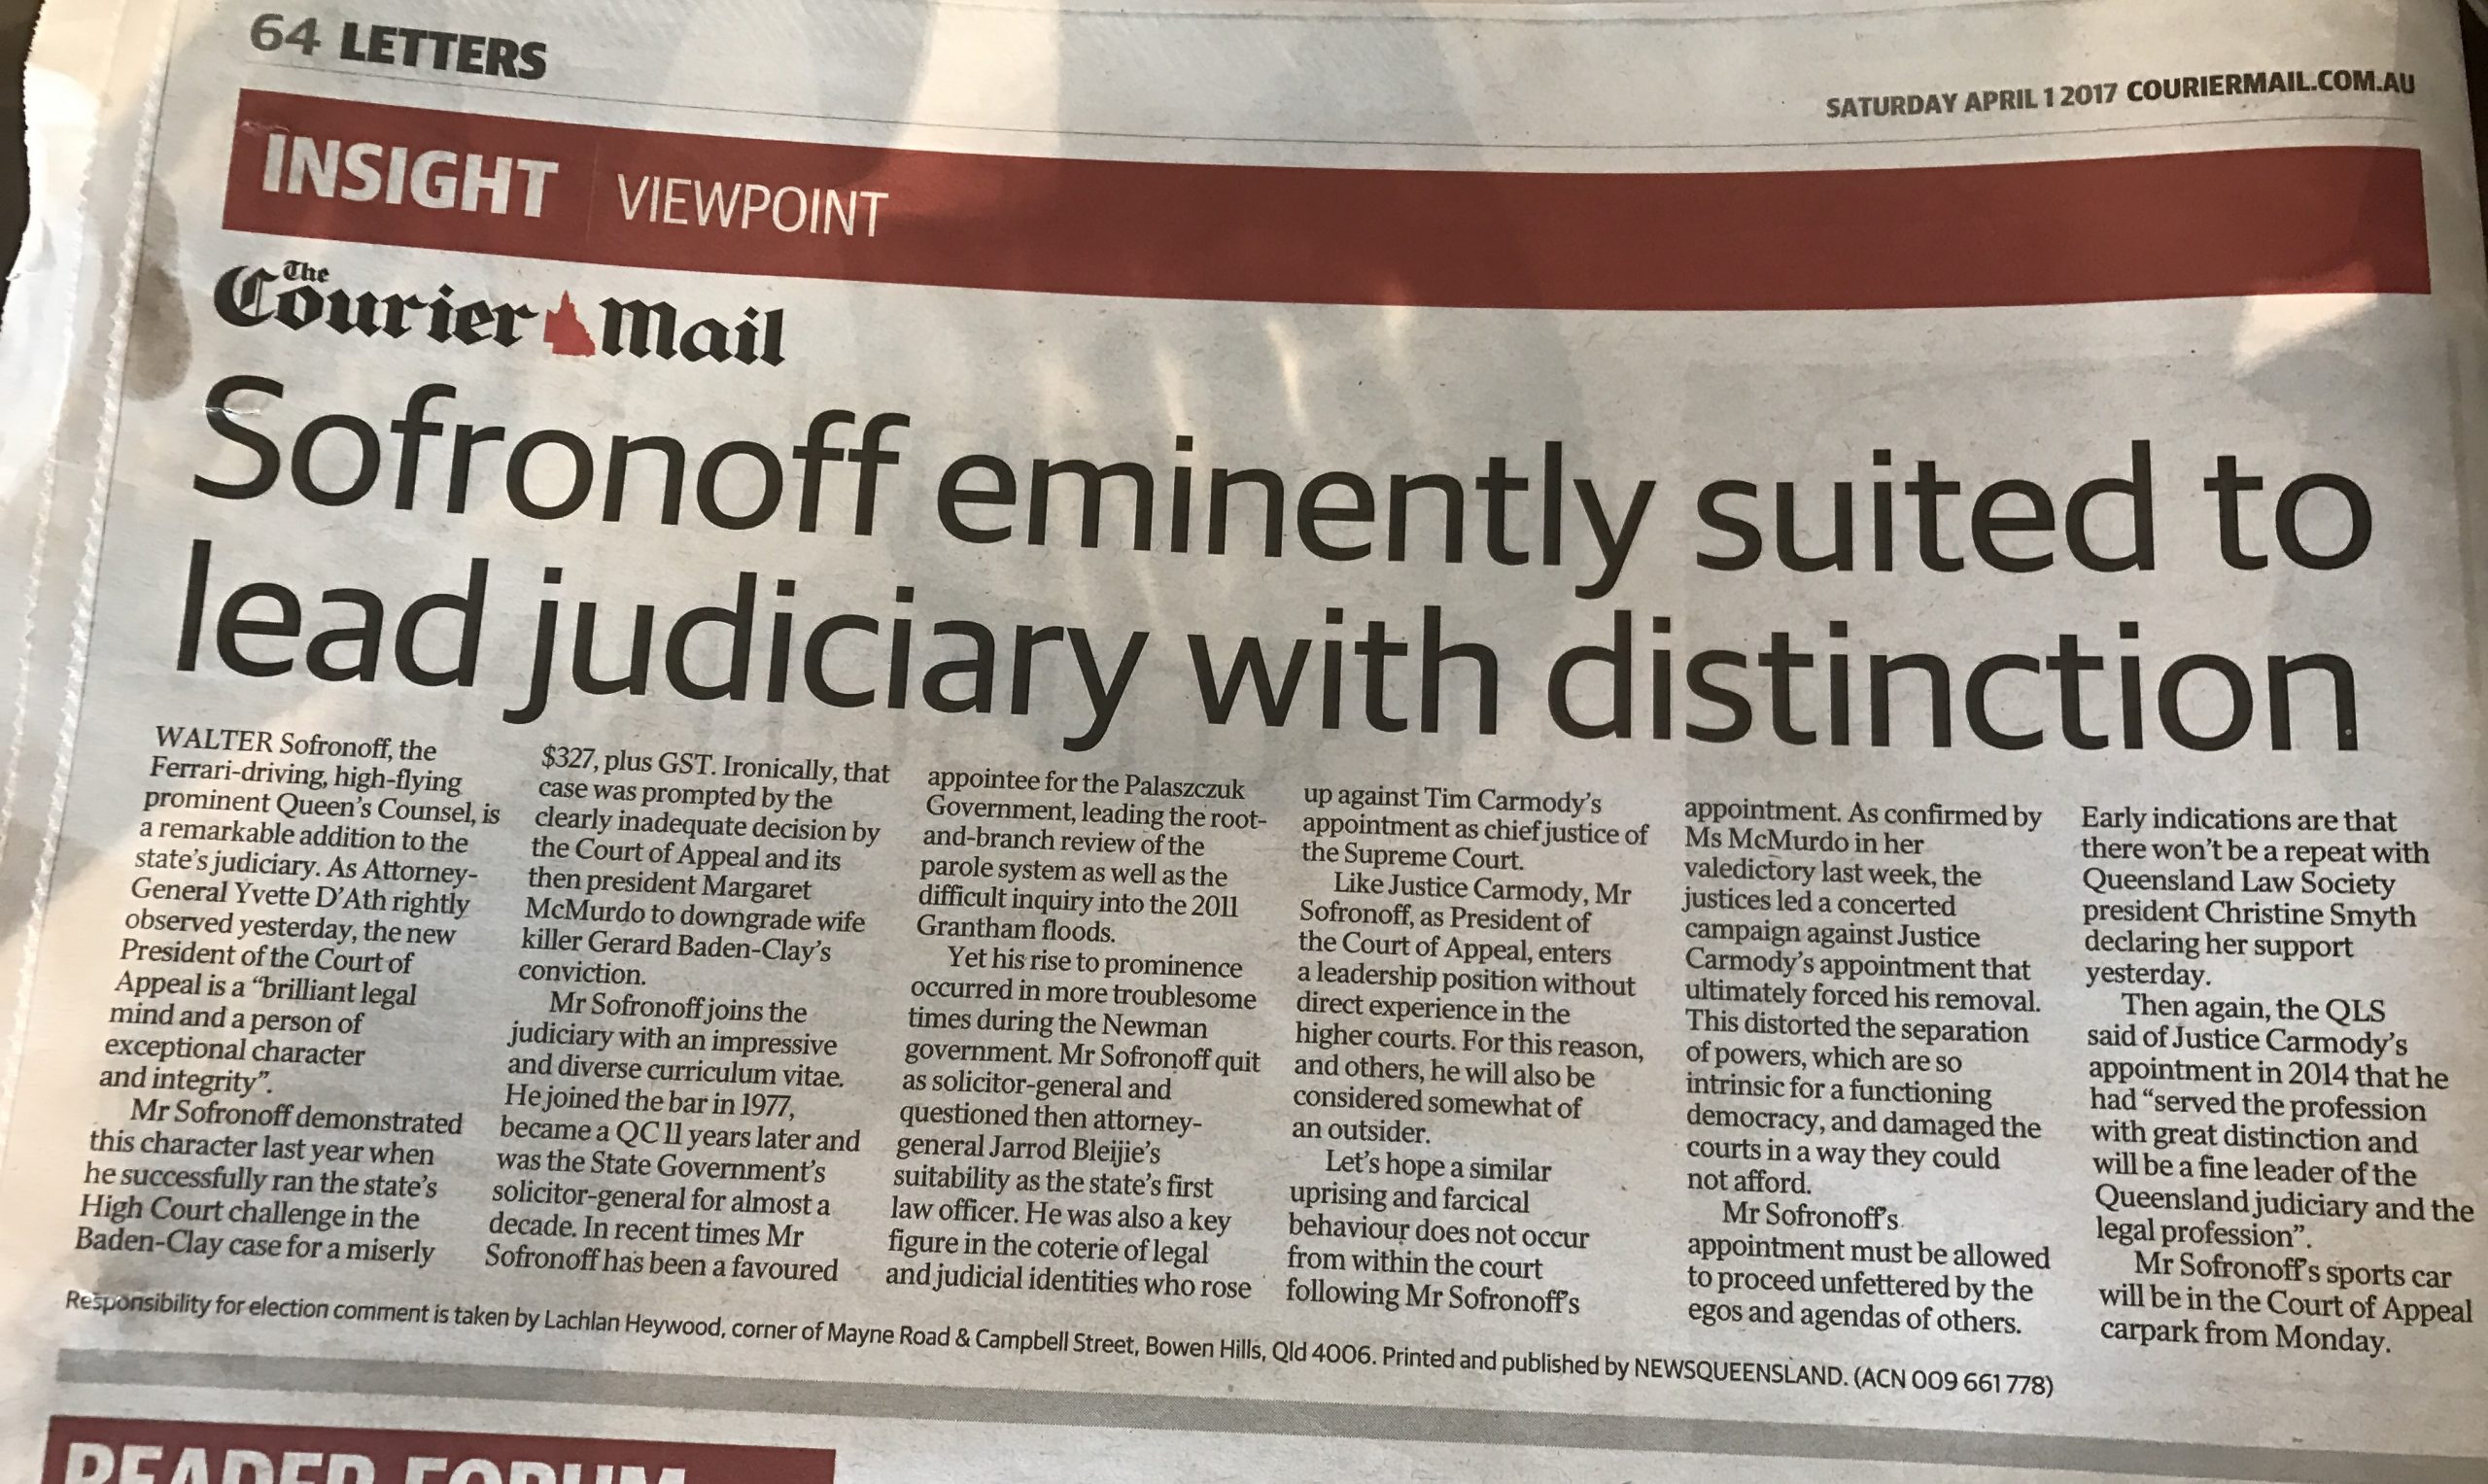 “Sofronoff eminently suited to lead judiciary with distinction”